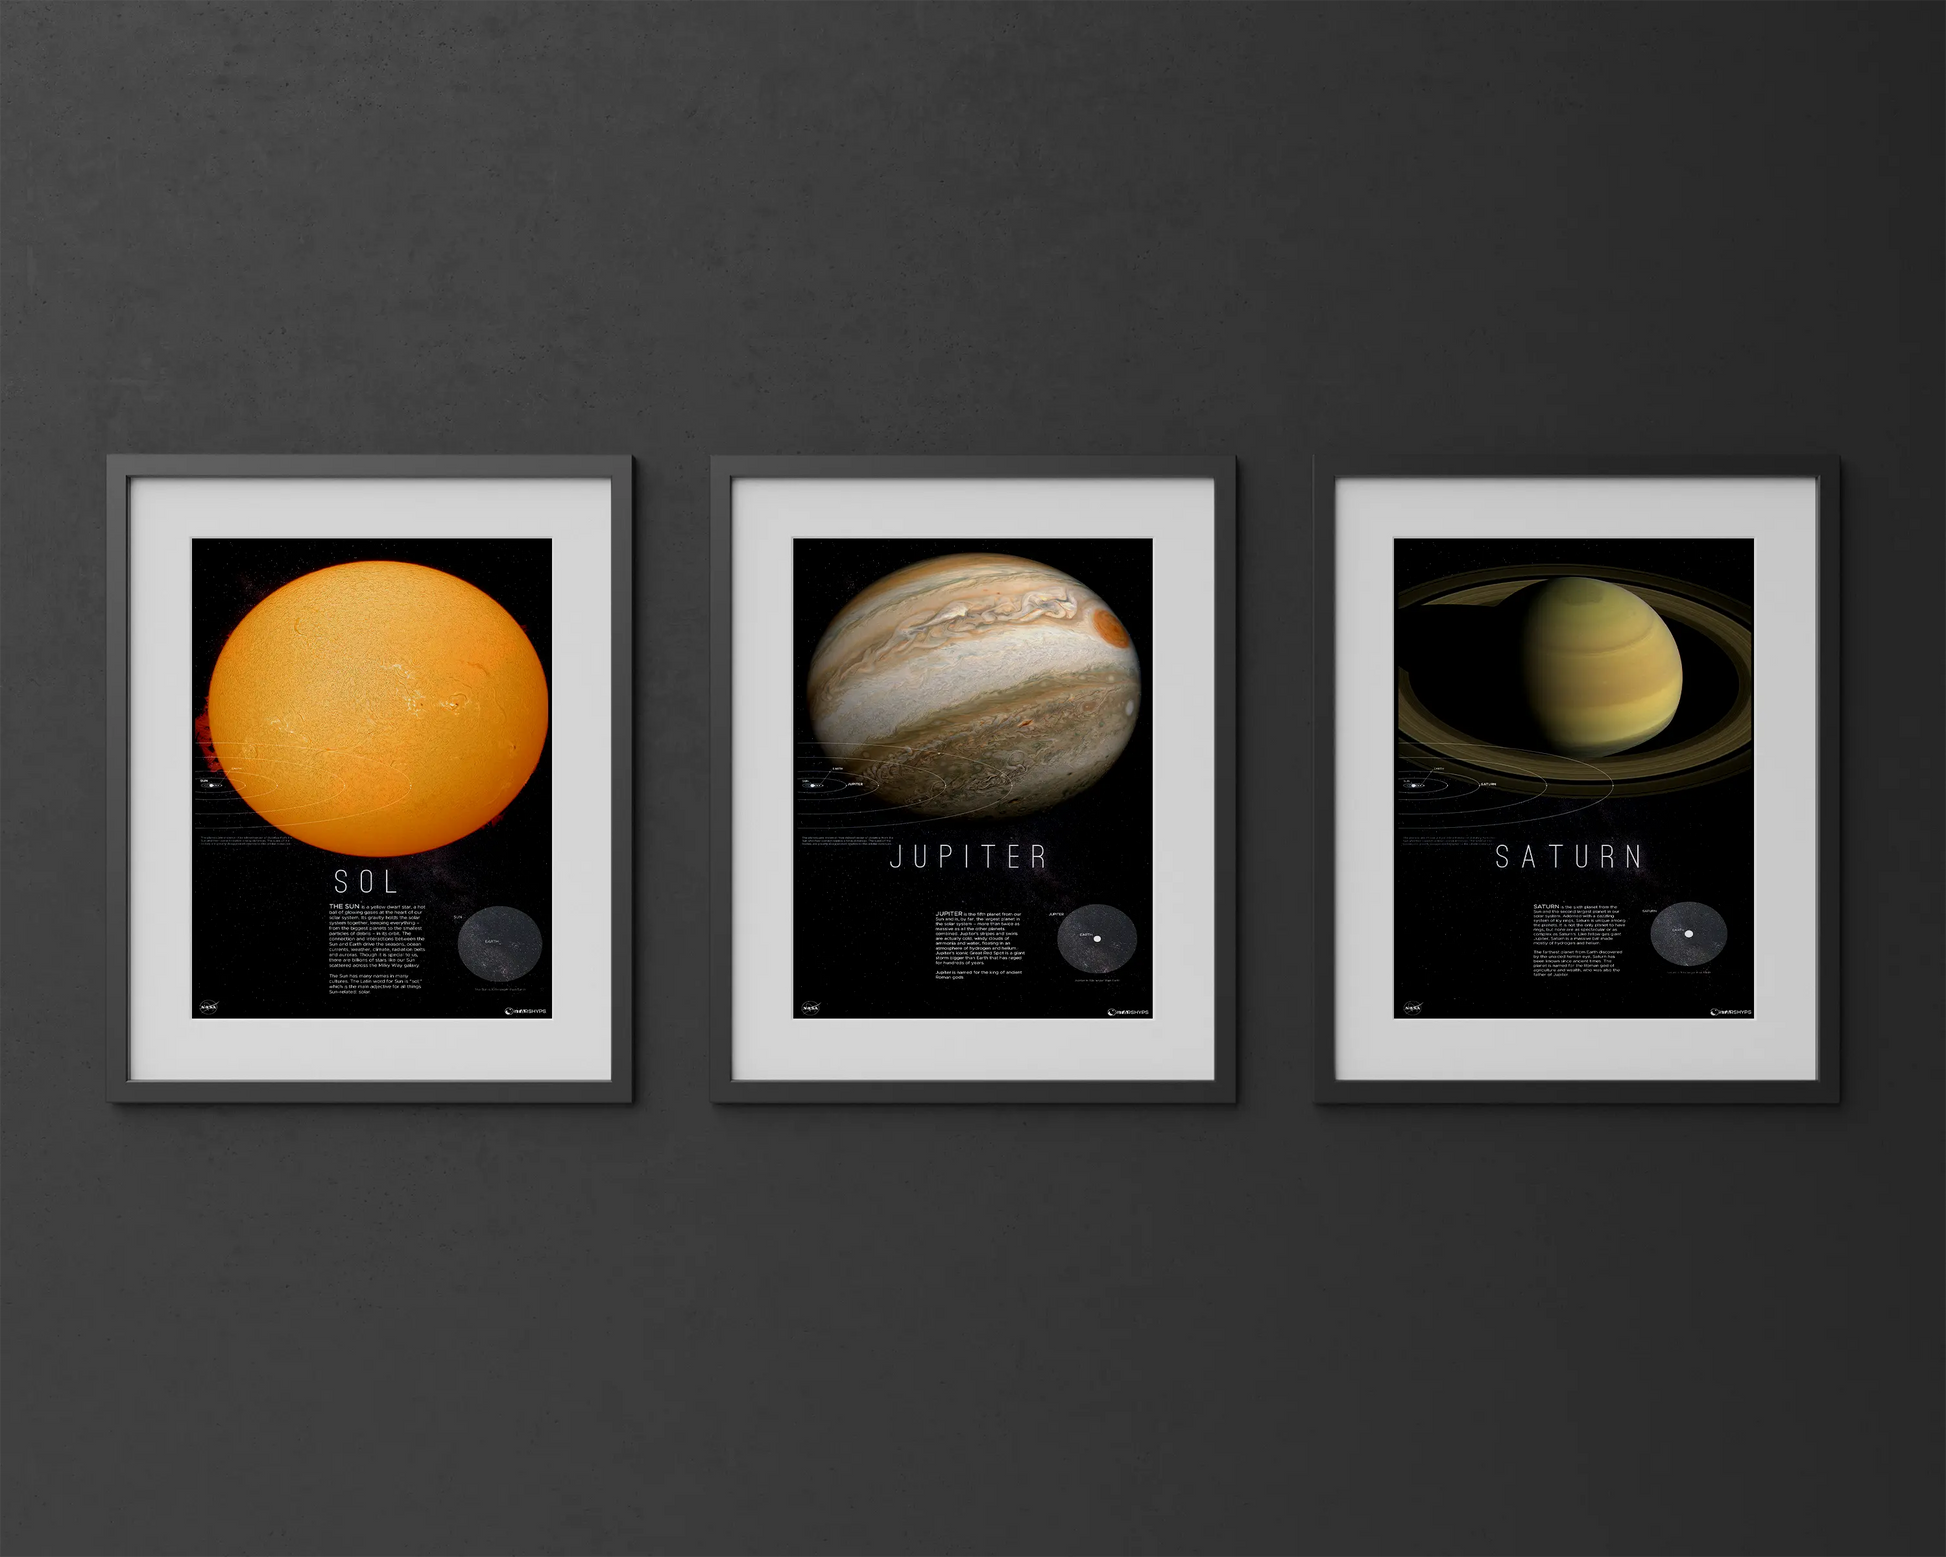 Mercury Mercurial Glow Decor | Mercury Print |Rocket Blueprint Posters | The image displays three framed posters on a dark background, each featuring an image and description of the Sun, Jupiter, and Saturn, with their names prominently labeled below the images.